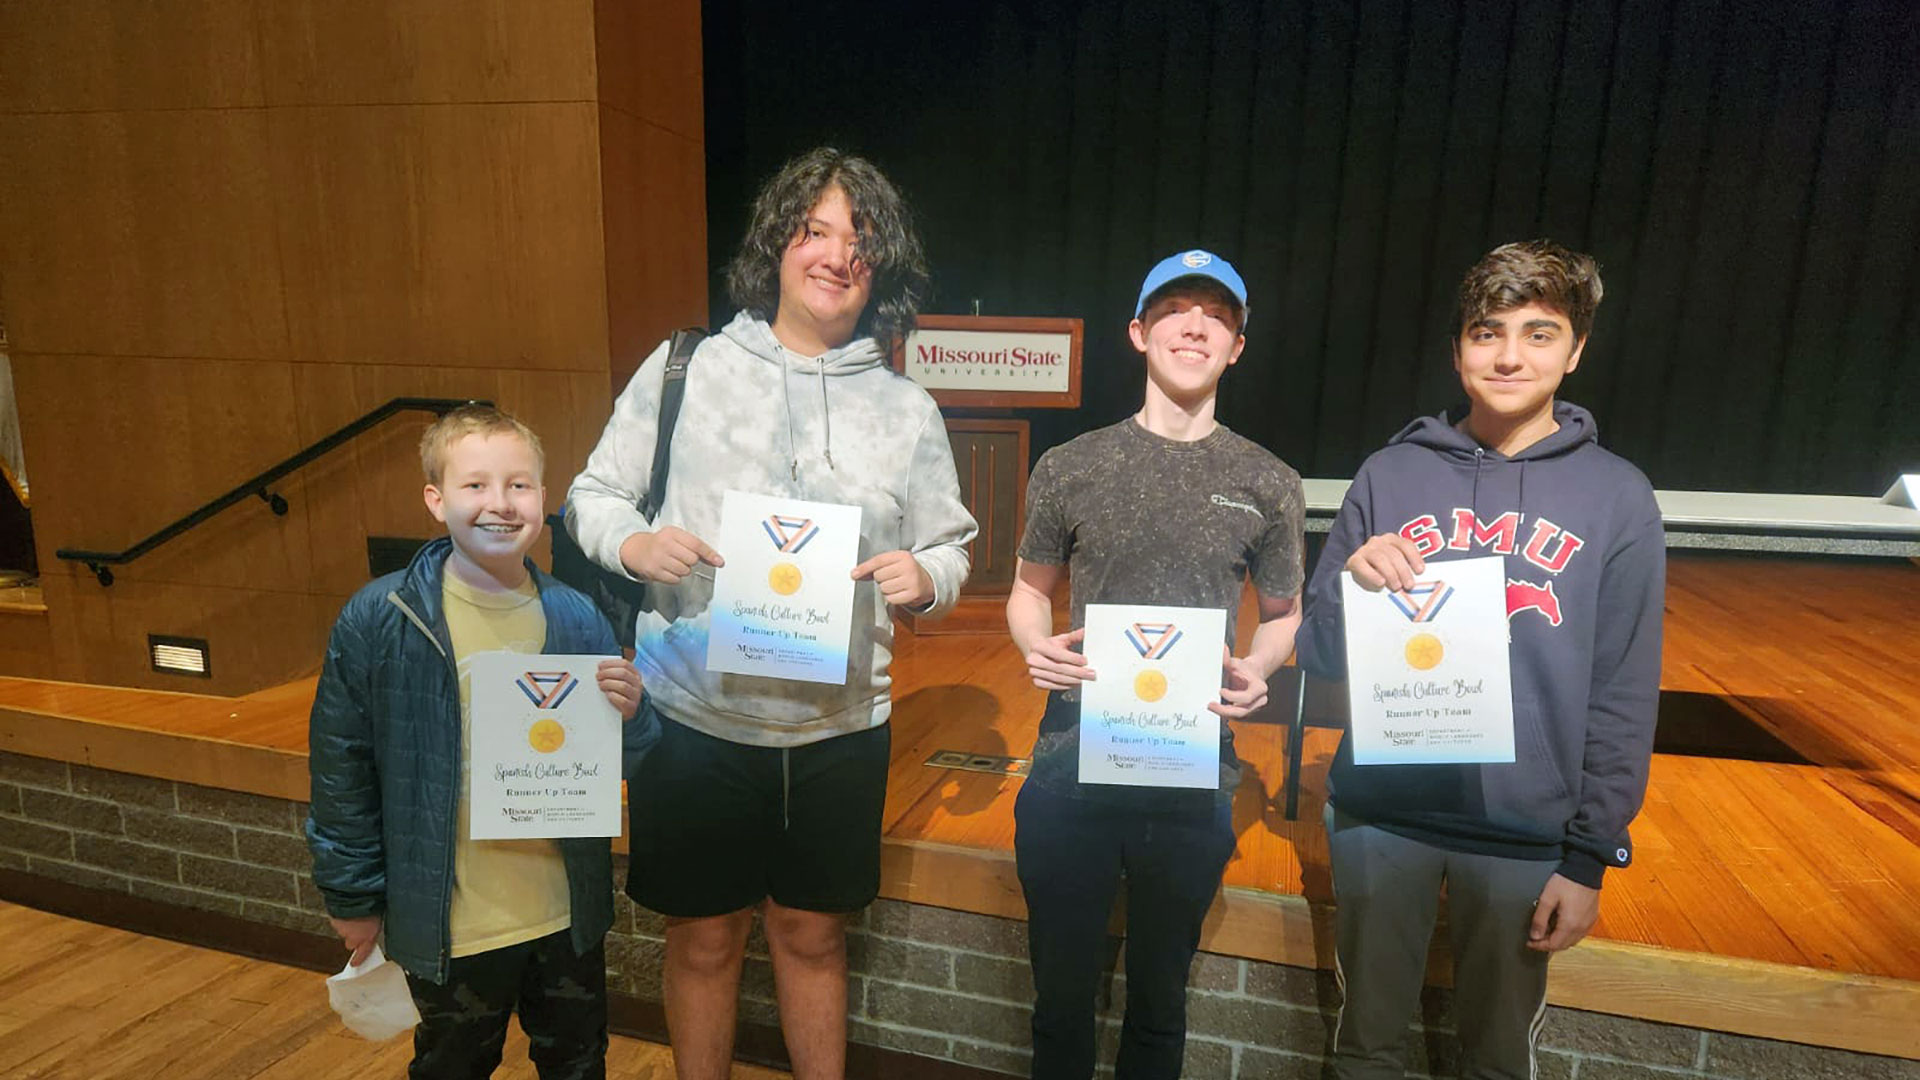 Four young students hold award certificates